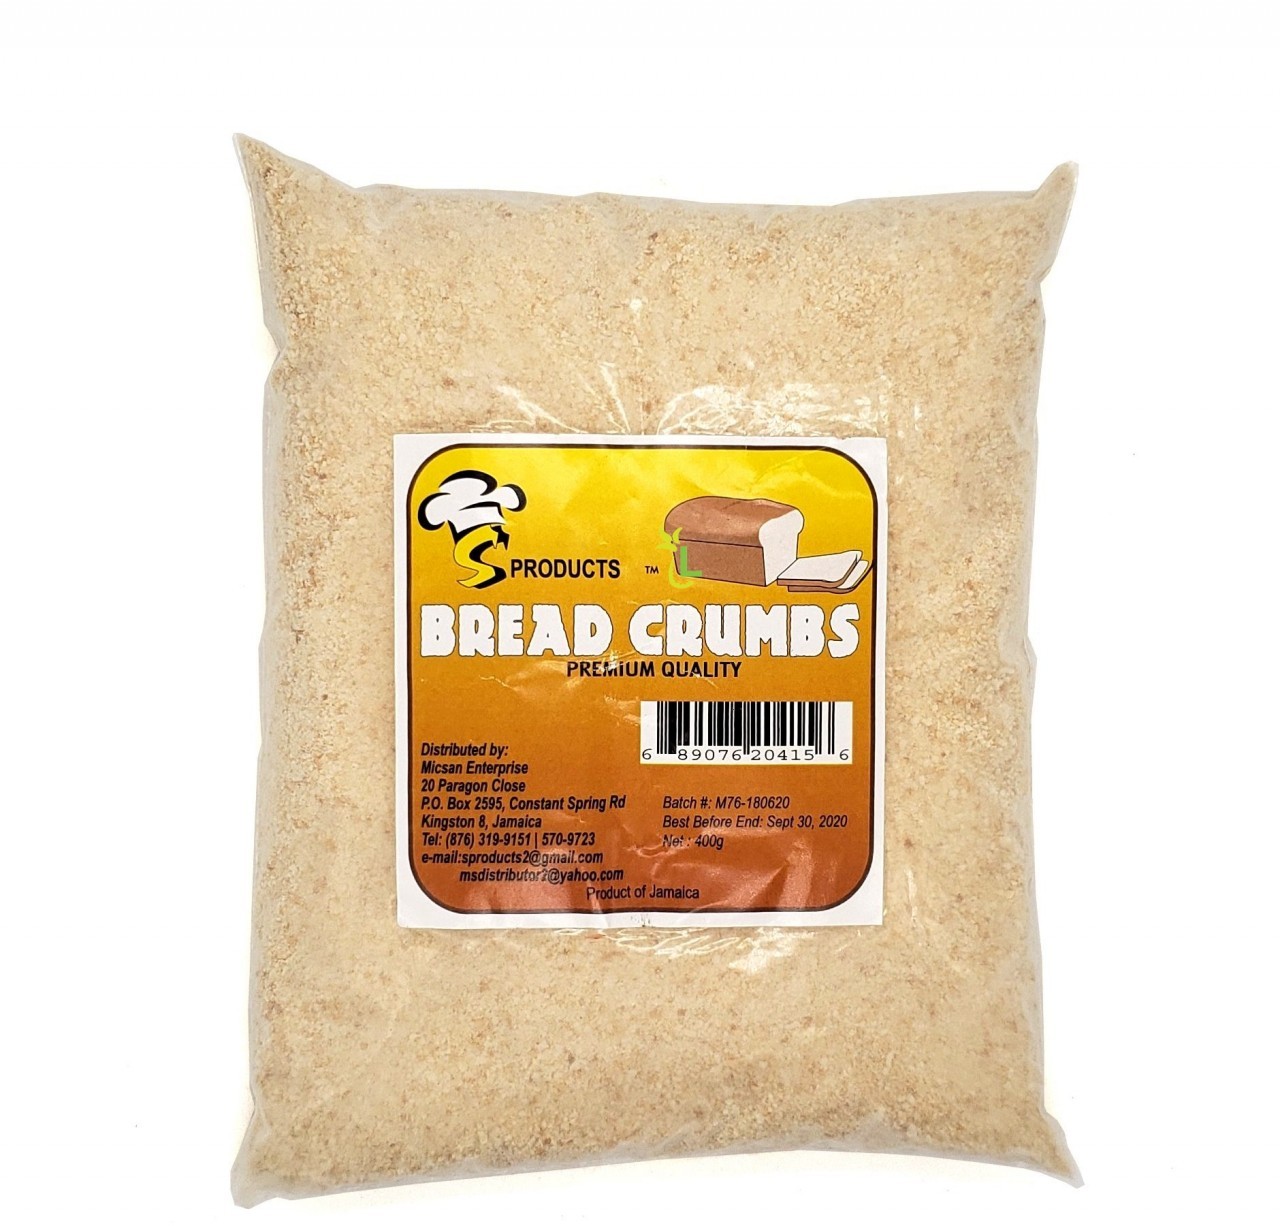 S PRODUCTS SPICED BREAD CRUMBS 400g